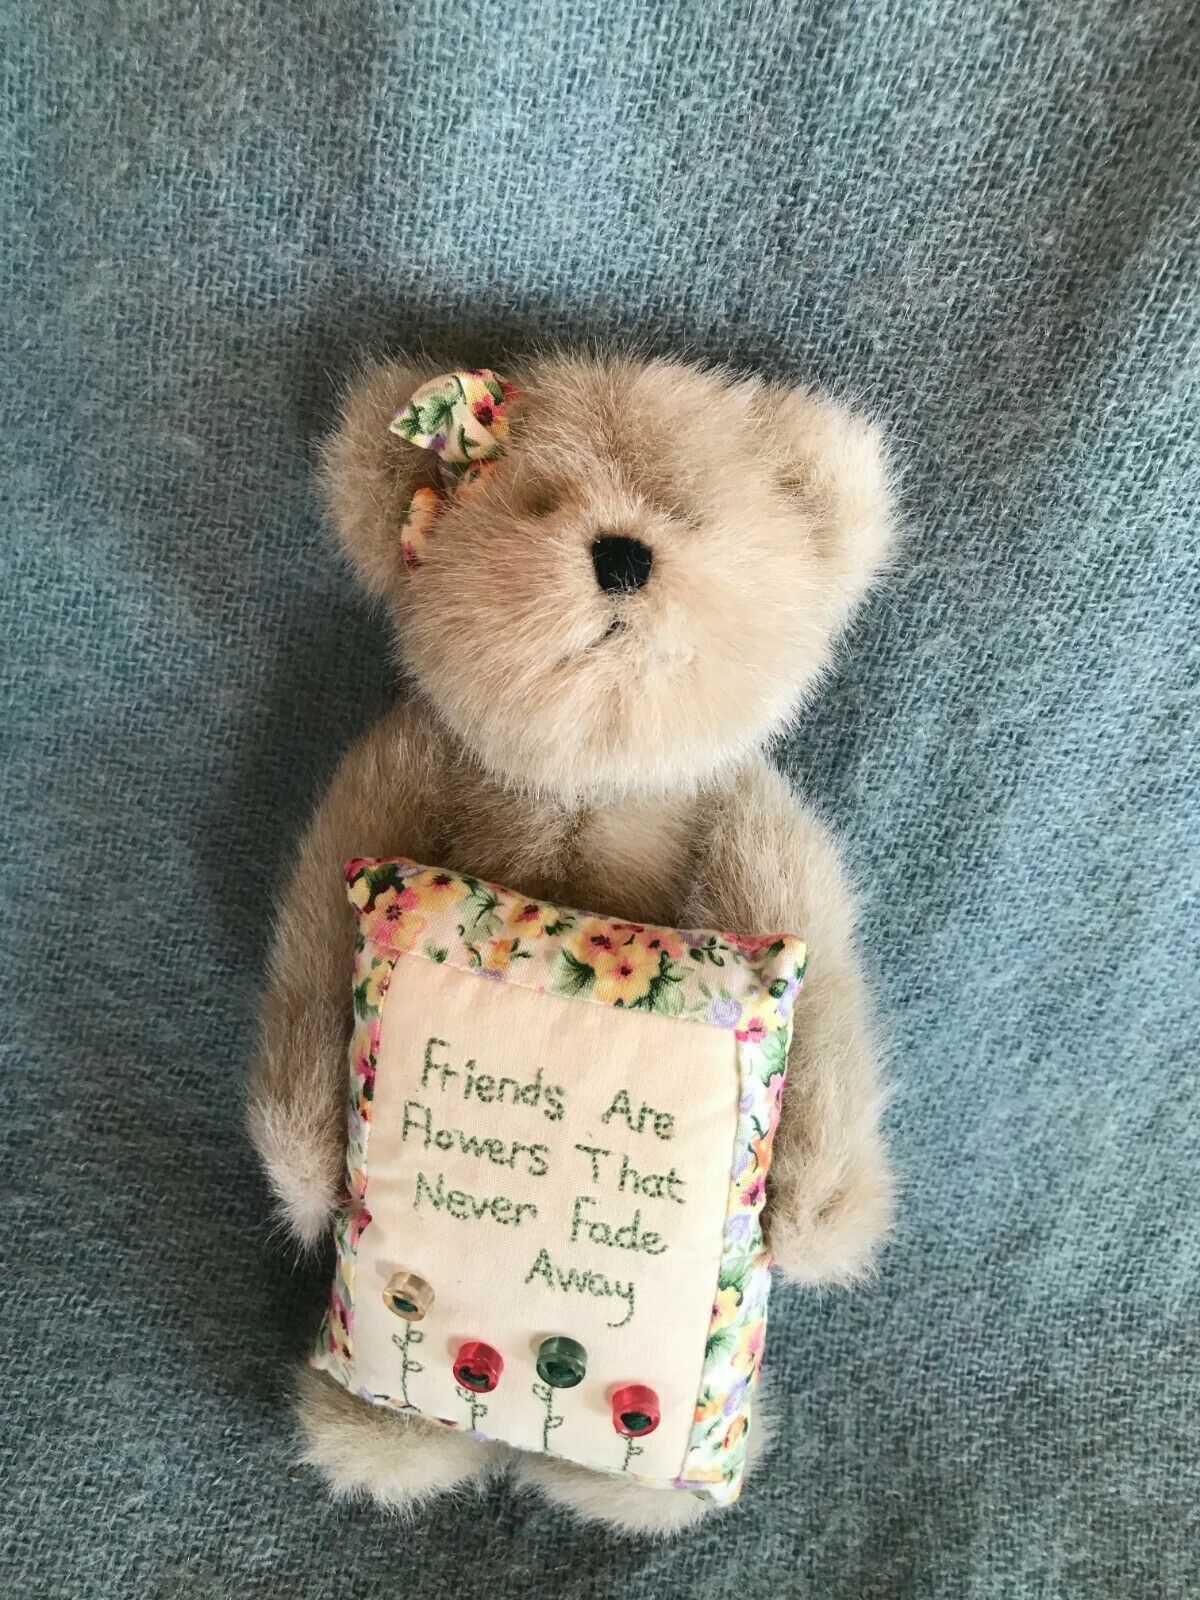 Gently Used Boyd’s Bears Tan Teddy Bear w Embroidered Floral Pillow FRIENDS ARE  - $11.29